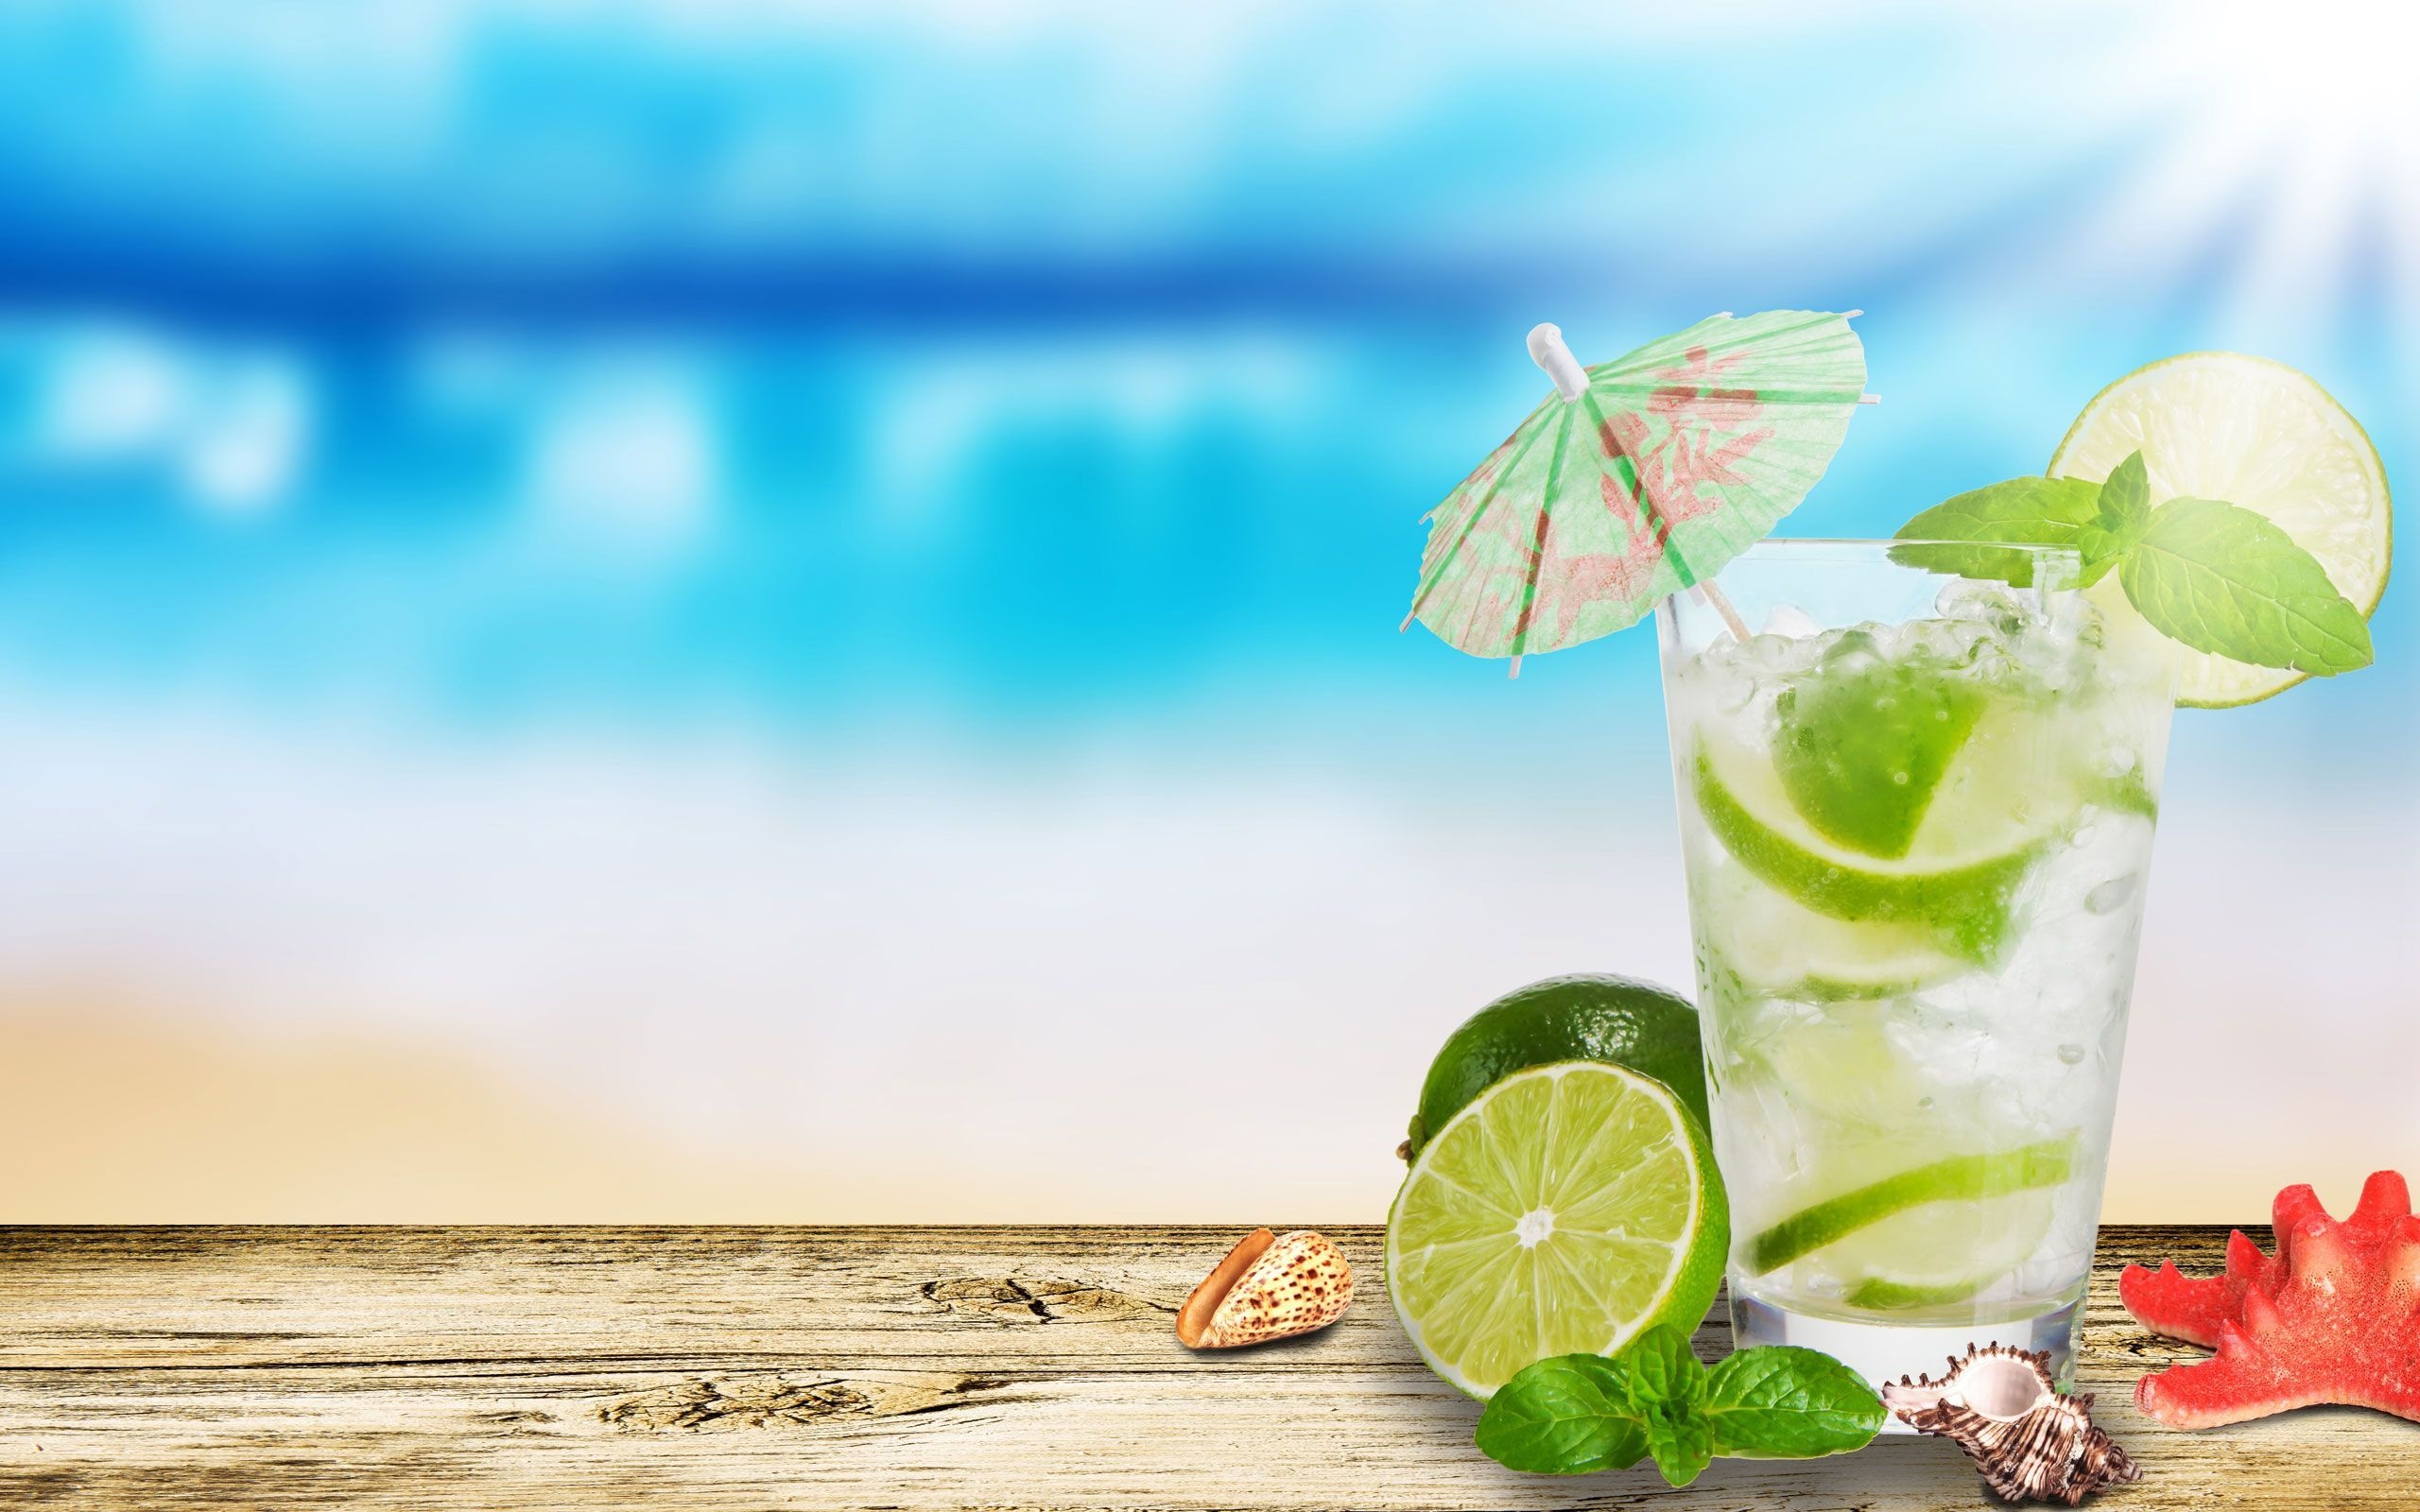 Lemonade: Summer drinks, Involves squeezing fresh citrus to extract the juice. 2560x1600 HD Wallpaper.